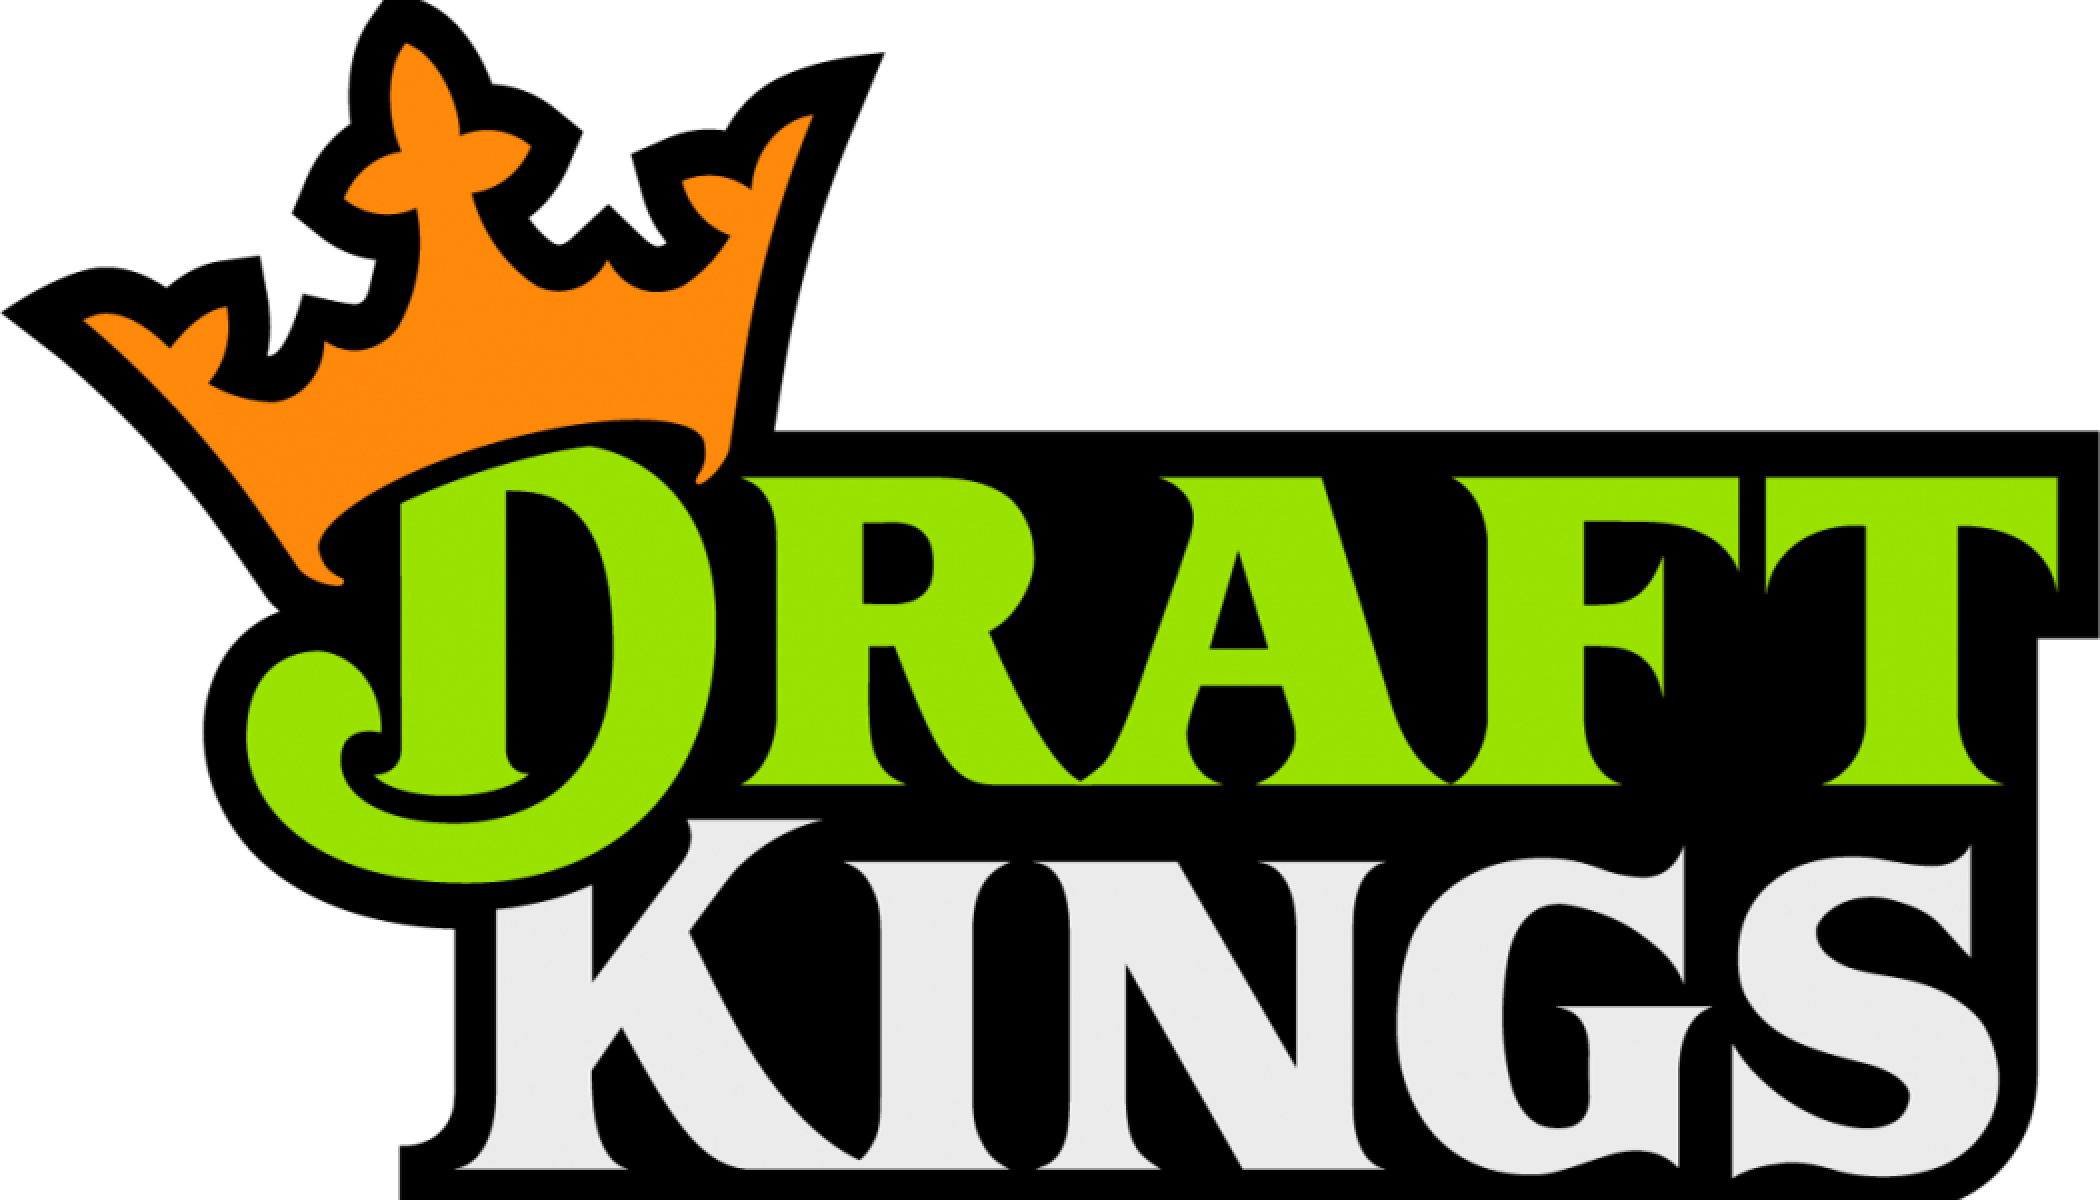 DraftKings Suffered $68.7 Million Loss in Q1 2020